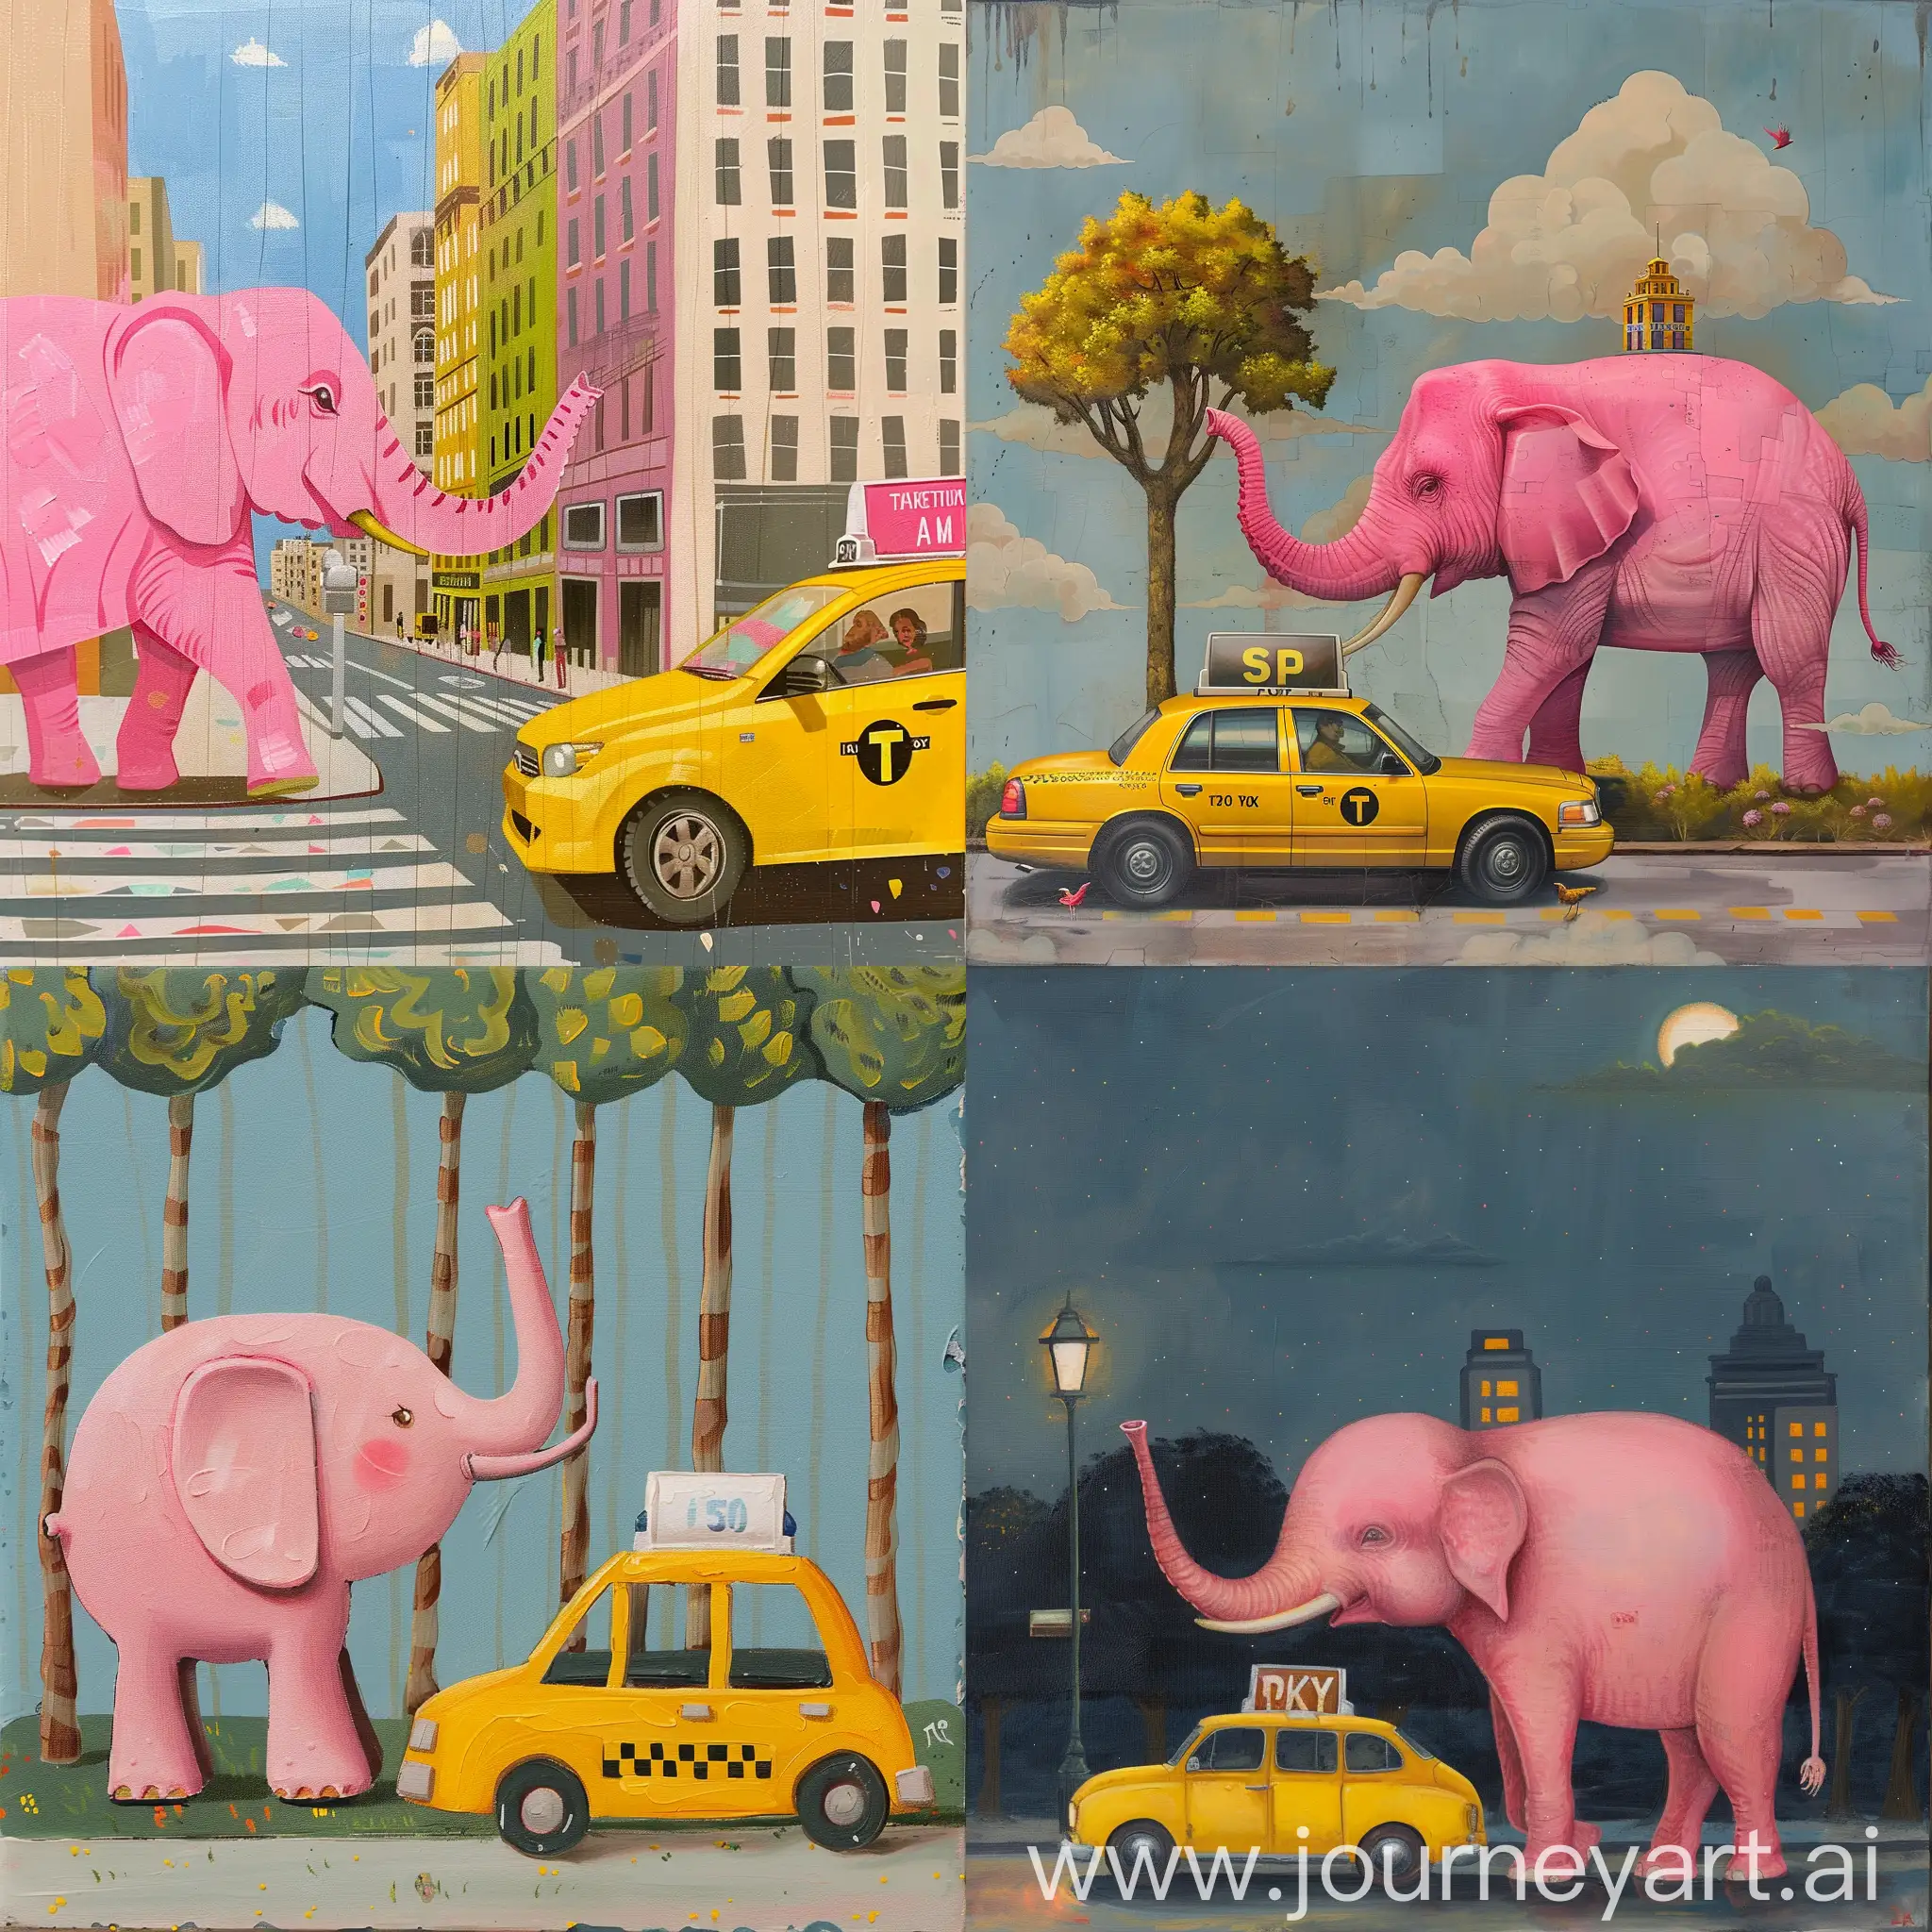 Whimsical-Encounter-Pink-Elephant-and-Yellow-Taxi-in-Urban-Wonderland